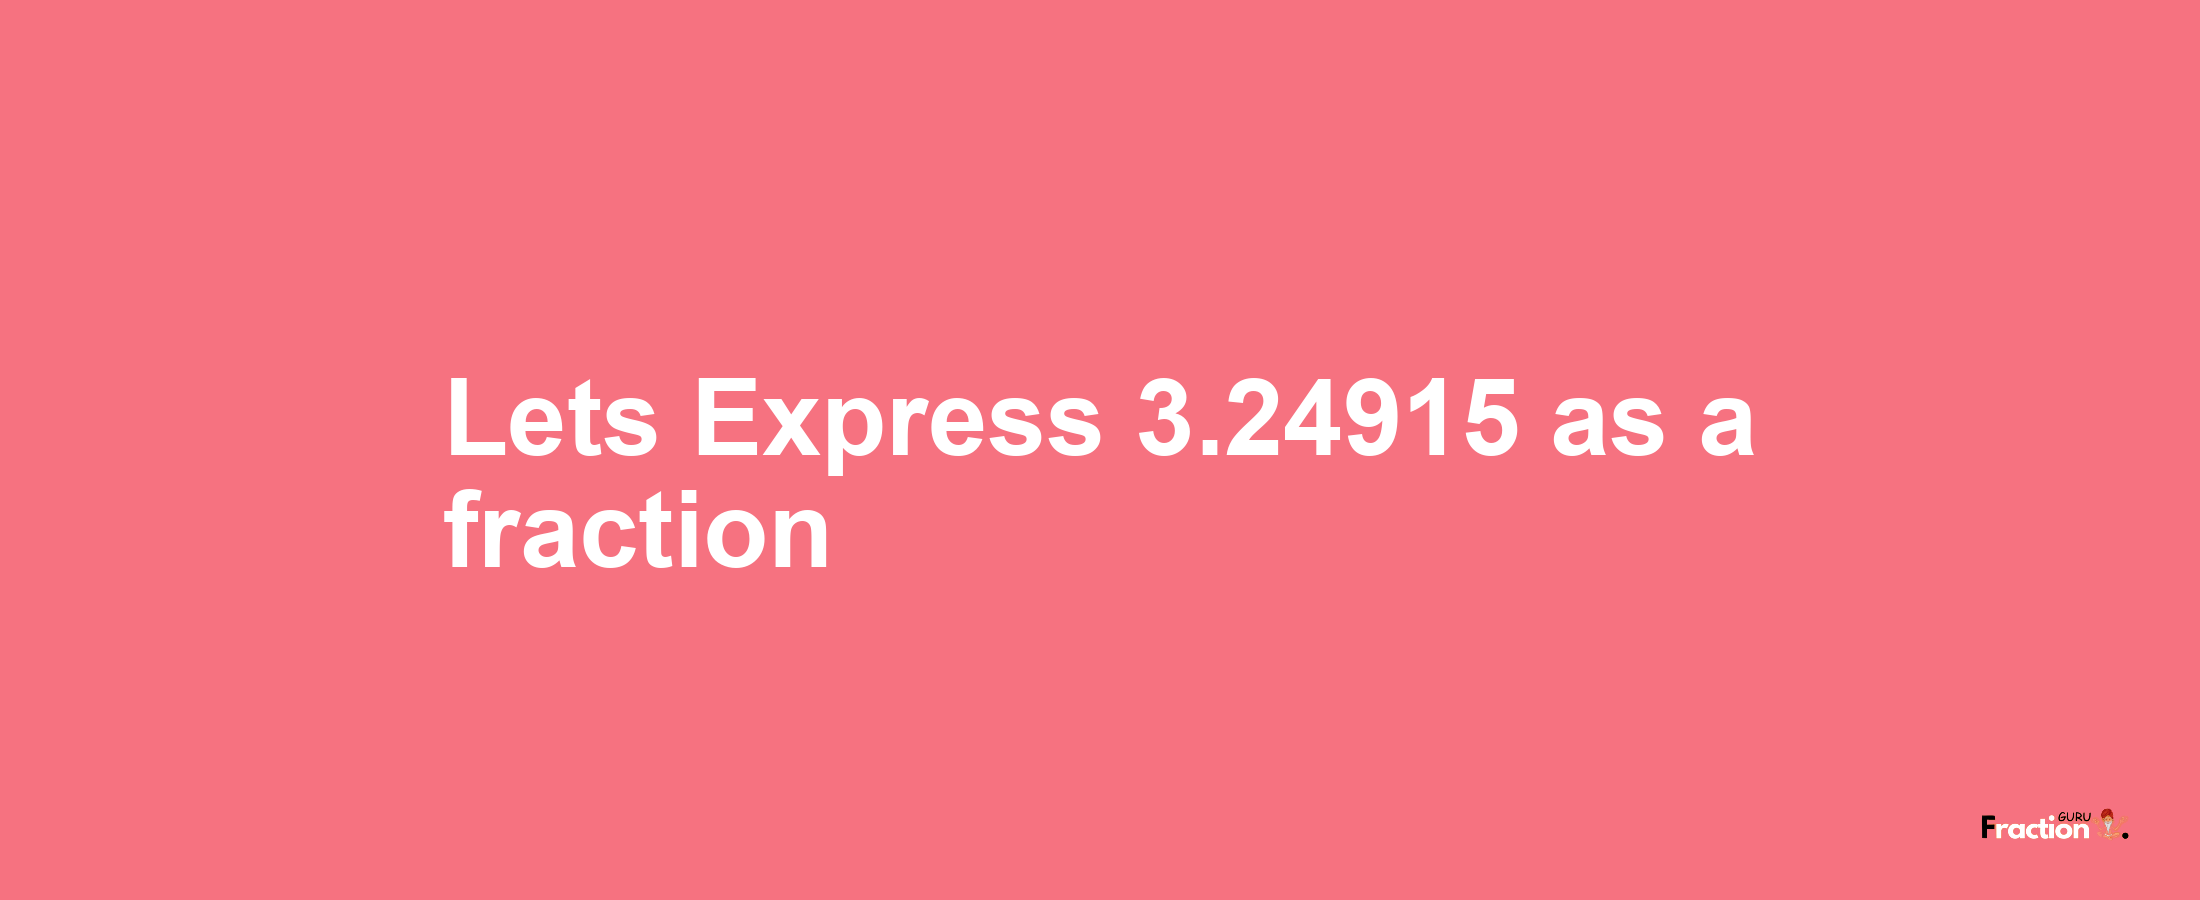 Lets Express 3.24915 as afraction